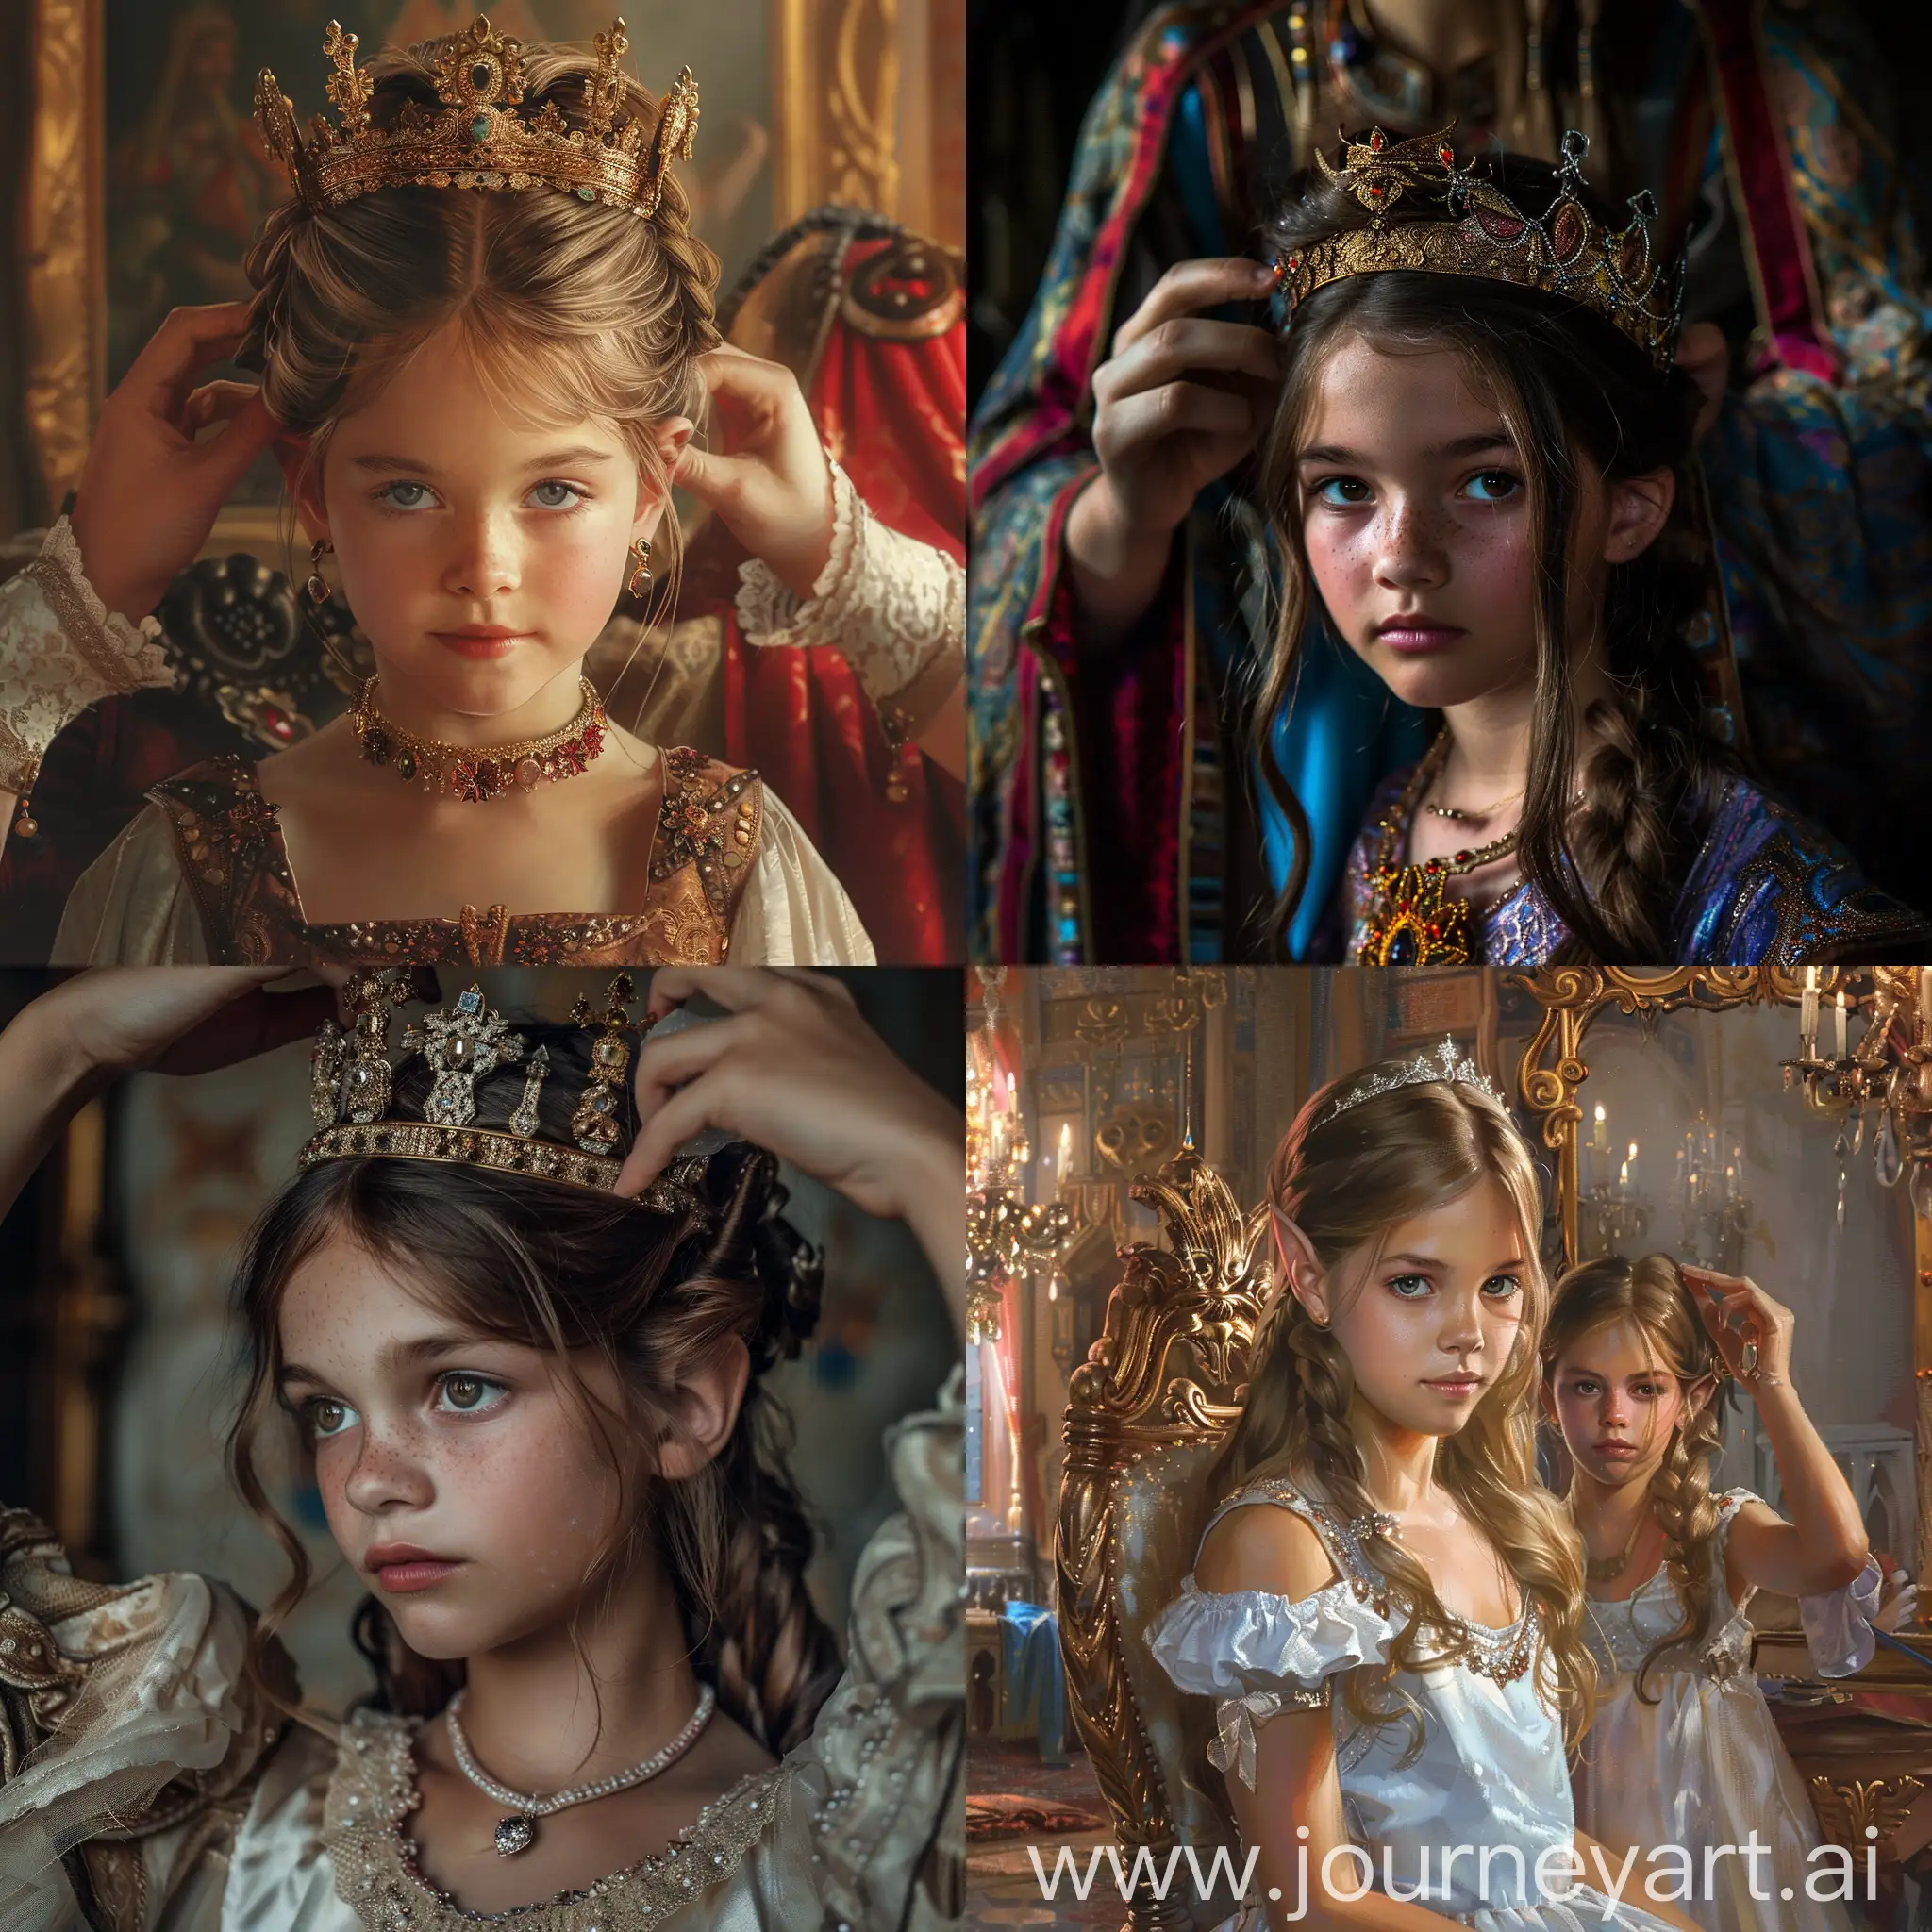 Young-Princess-Preparing-for-Coronation-in-a-High-Fantasy-Realm